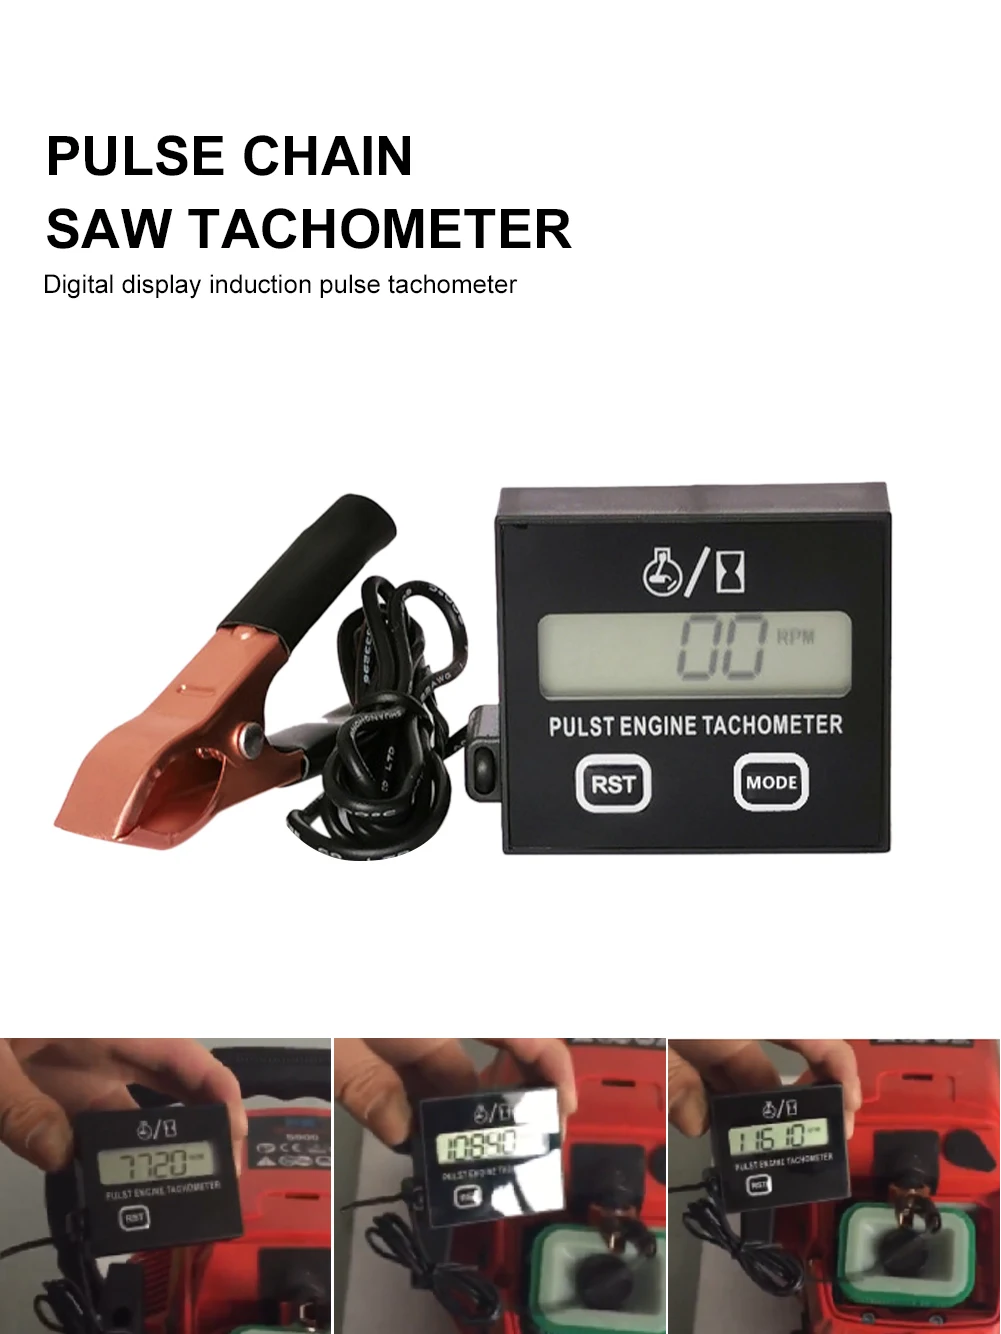 

Digital Gasoline Engine Tachometer Resettable Inductive Contact Tachometer Battery Operated for Chain Saw Engine Lawnmower